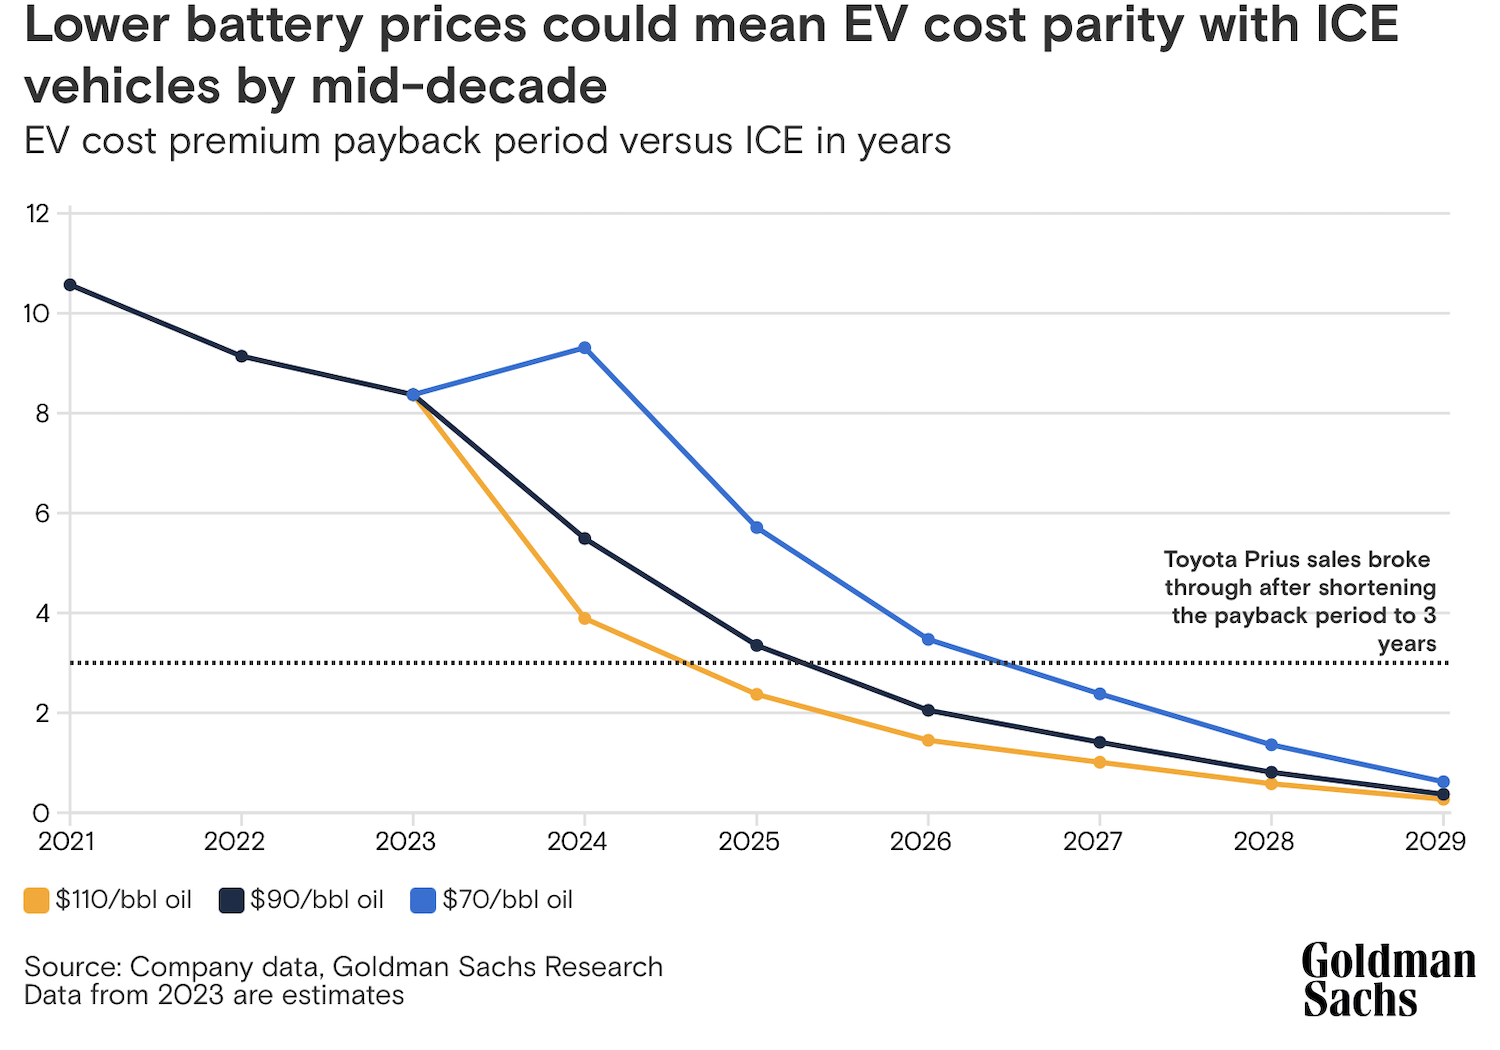 FOTW #1272, January 9, 2023: Electric Vehicle Battery Pack Costs in 2022  Are Nearly 90% Lower than in 2008, according to DOE Estimates